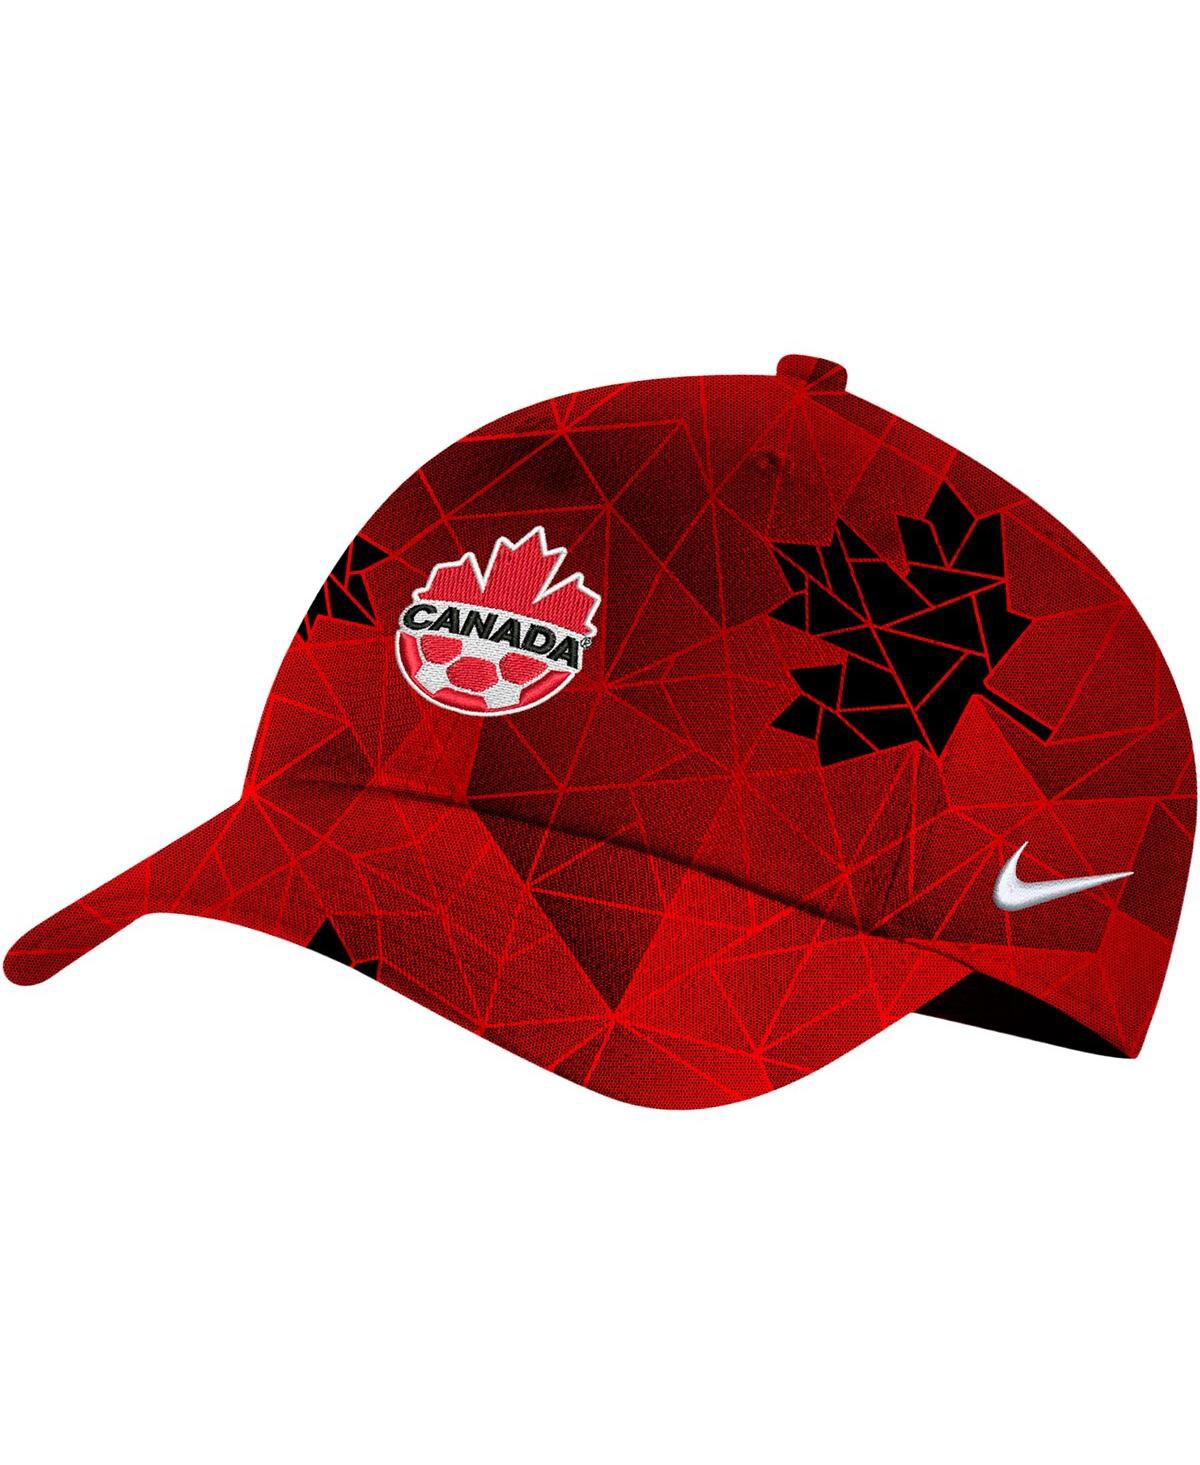 Shop Nike Women's  Red Canada Soccer Campus Adjustable Hat